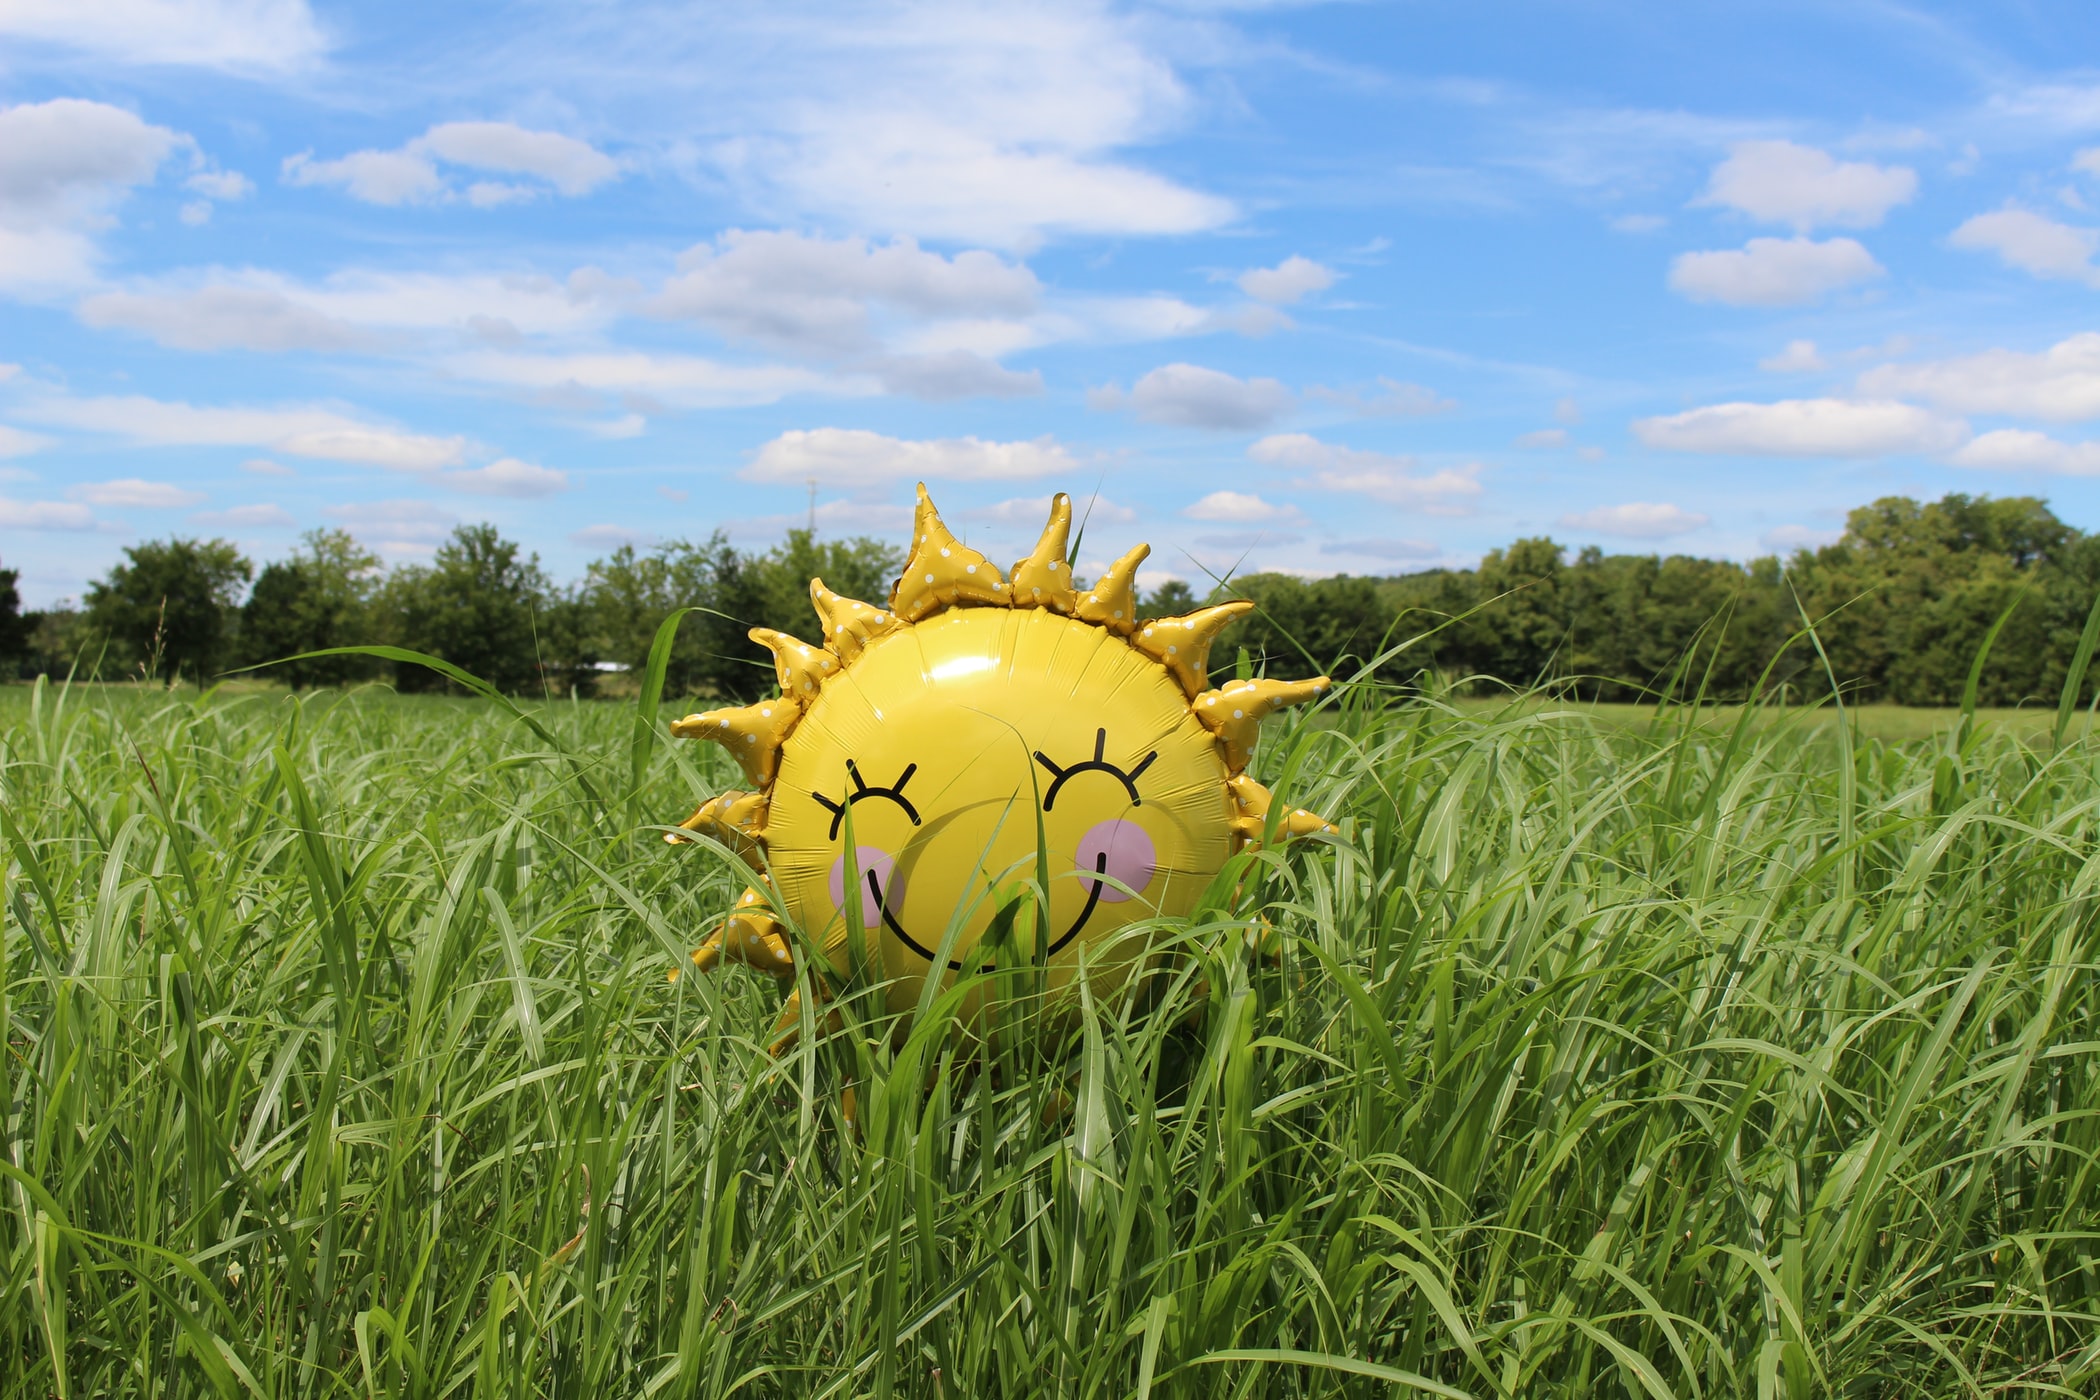 Image shows and inflatable sunshine with a smiley face in long grass with a blue sky overhead